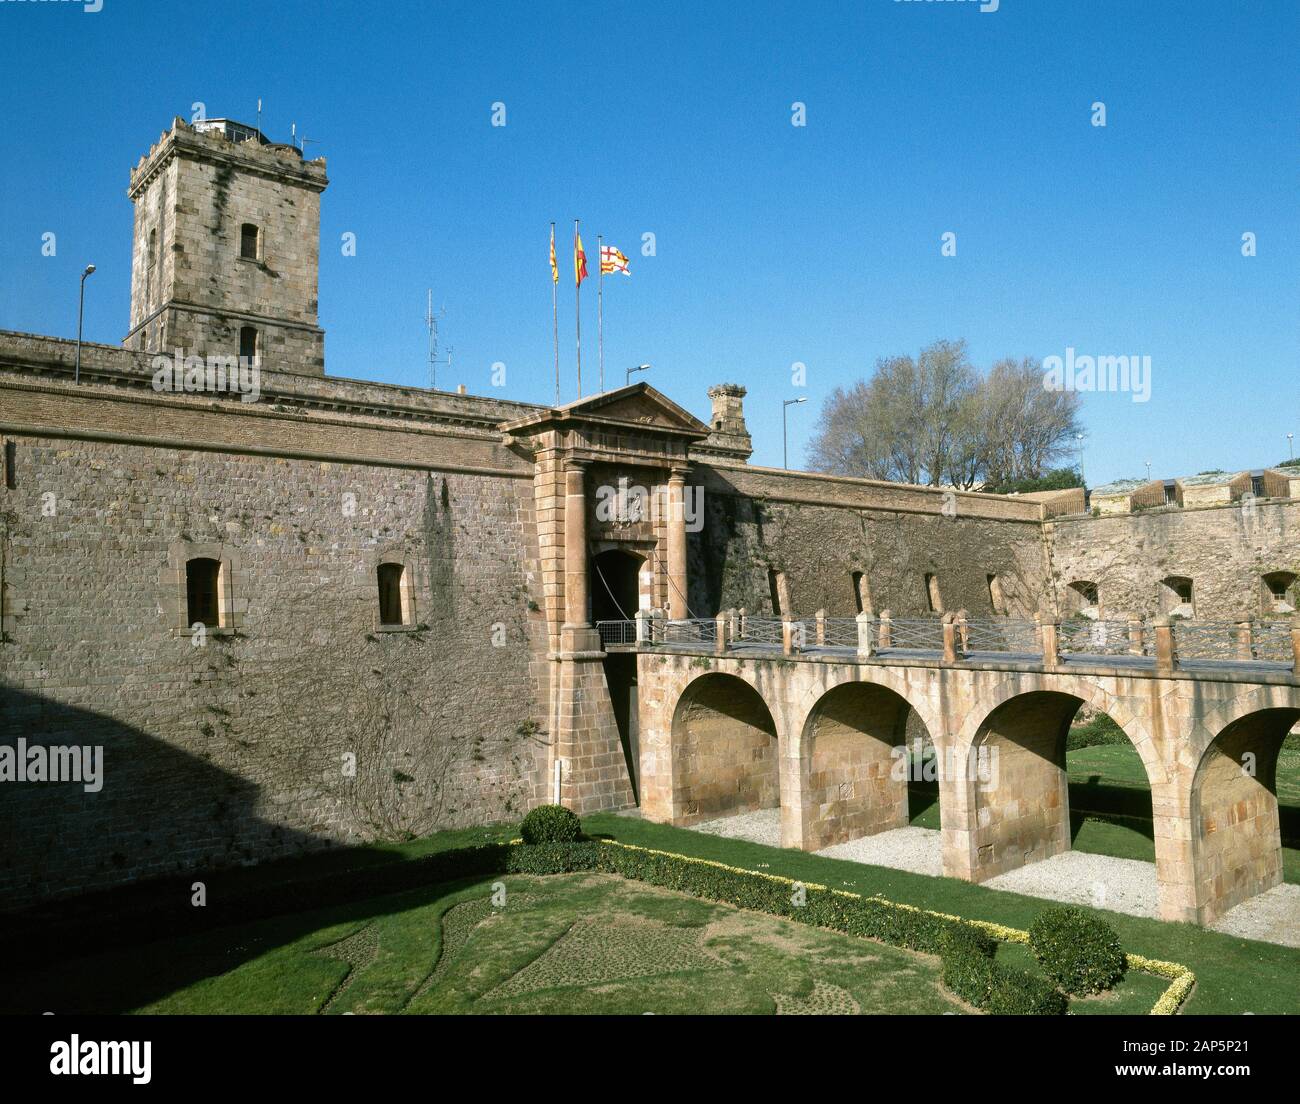 Spain, Catalonia, Barcelona. Montjuic Castle. Old military fortress. The project of the refurbishment works of the castle  were presented on January 14, 1751 by the architect Juan Martin Cermeño, and the works began in 1753. Entrance to the castle across the former moat. Historical photo, taken in 1993. Stock Photo